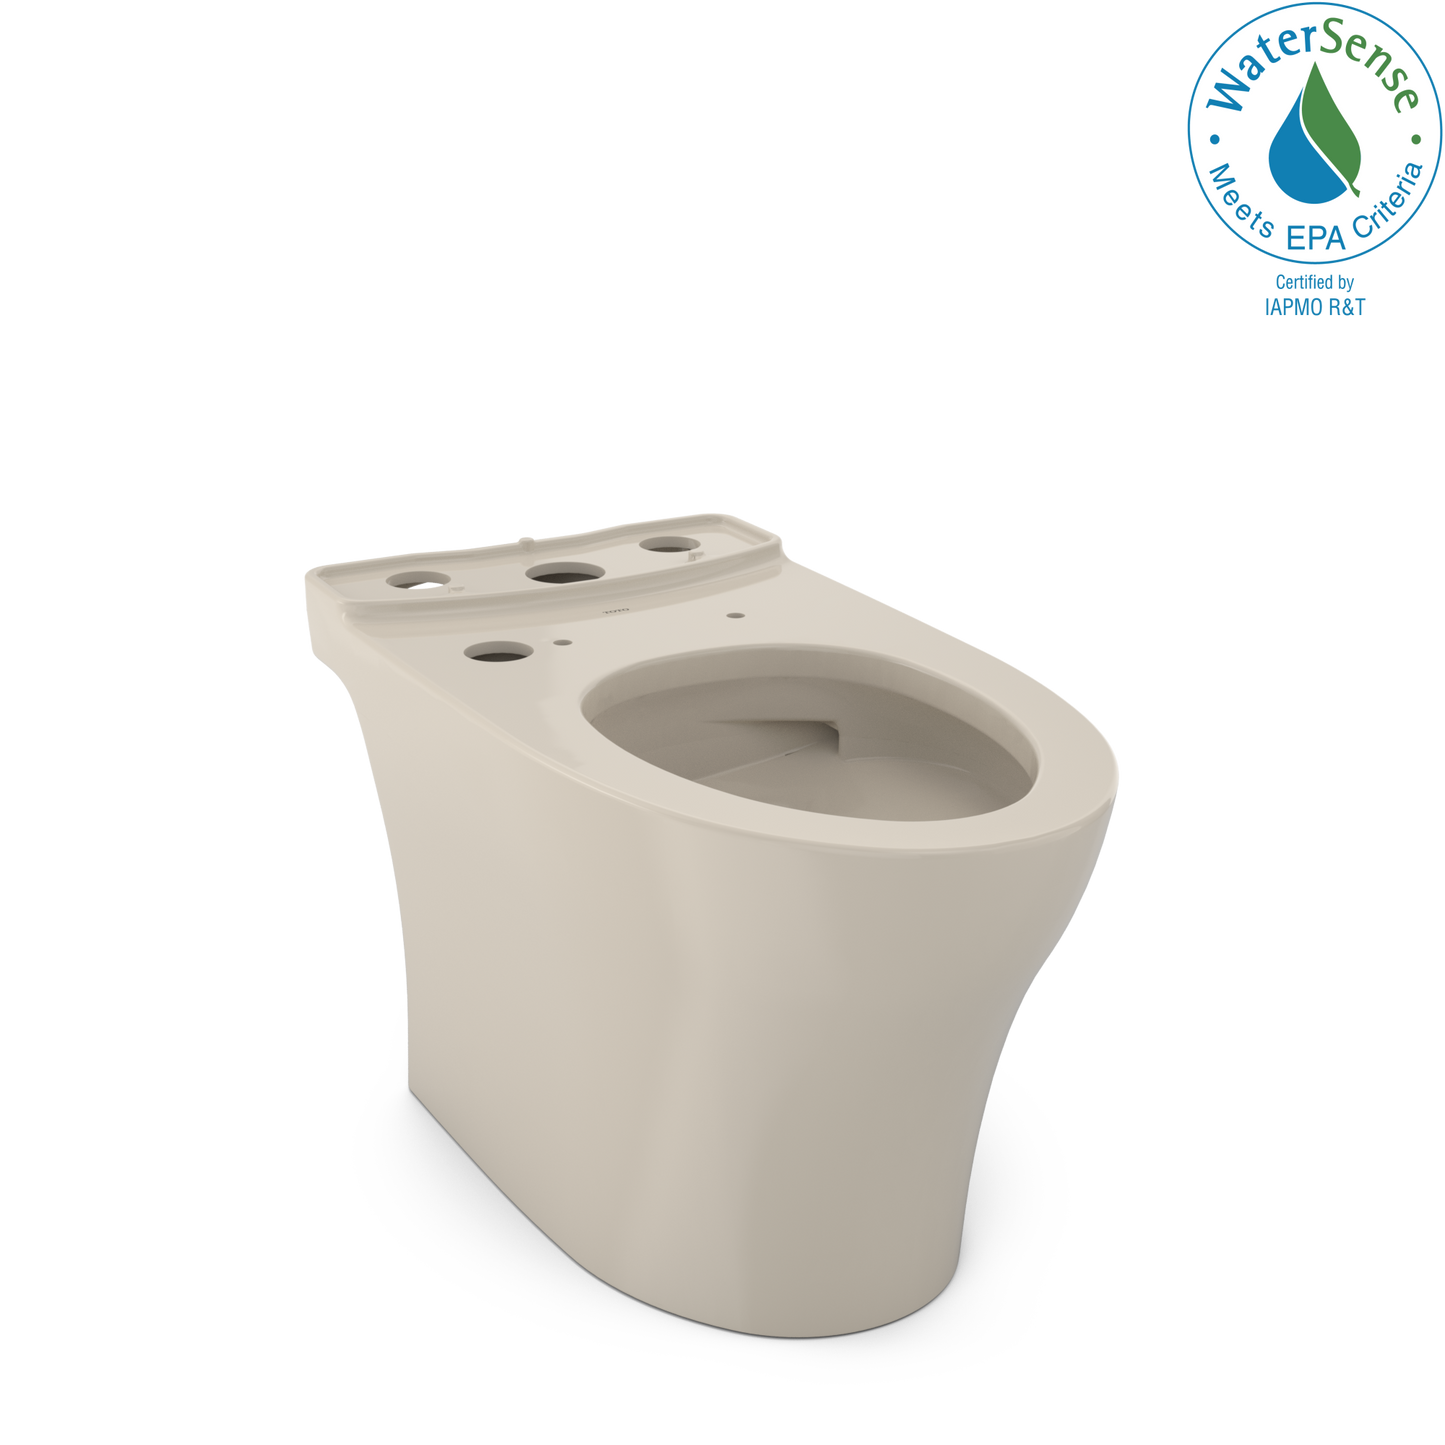 TOTO Aquia IV WASHLET+ Elongated Skirted Toilet Bowl with CEFIONTECT - CT446CEGNT40